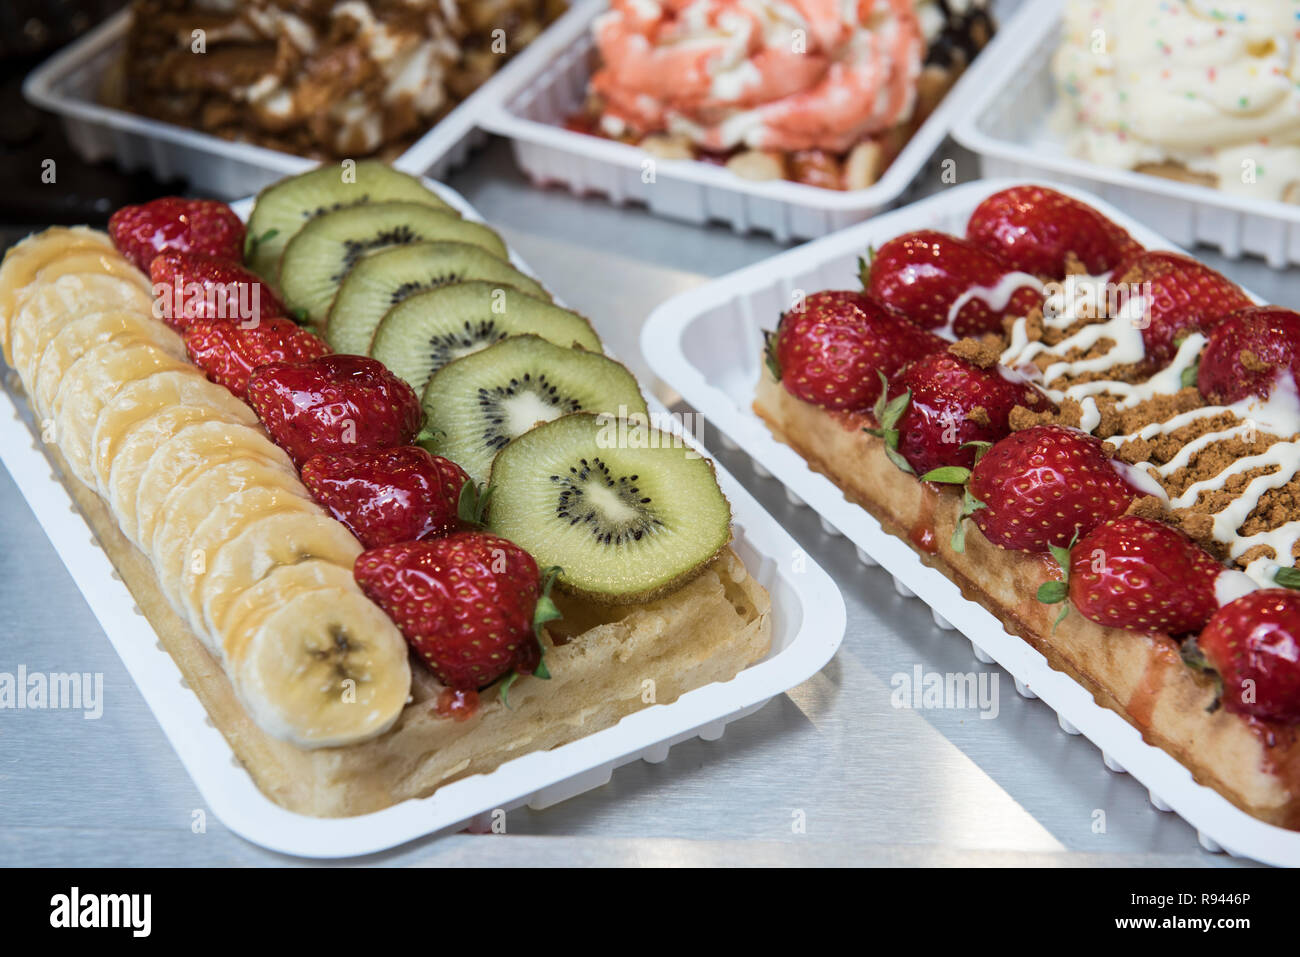 Leige Waffles With Fruit Toppings Stock Photo